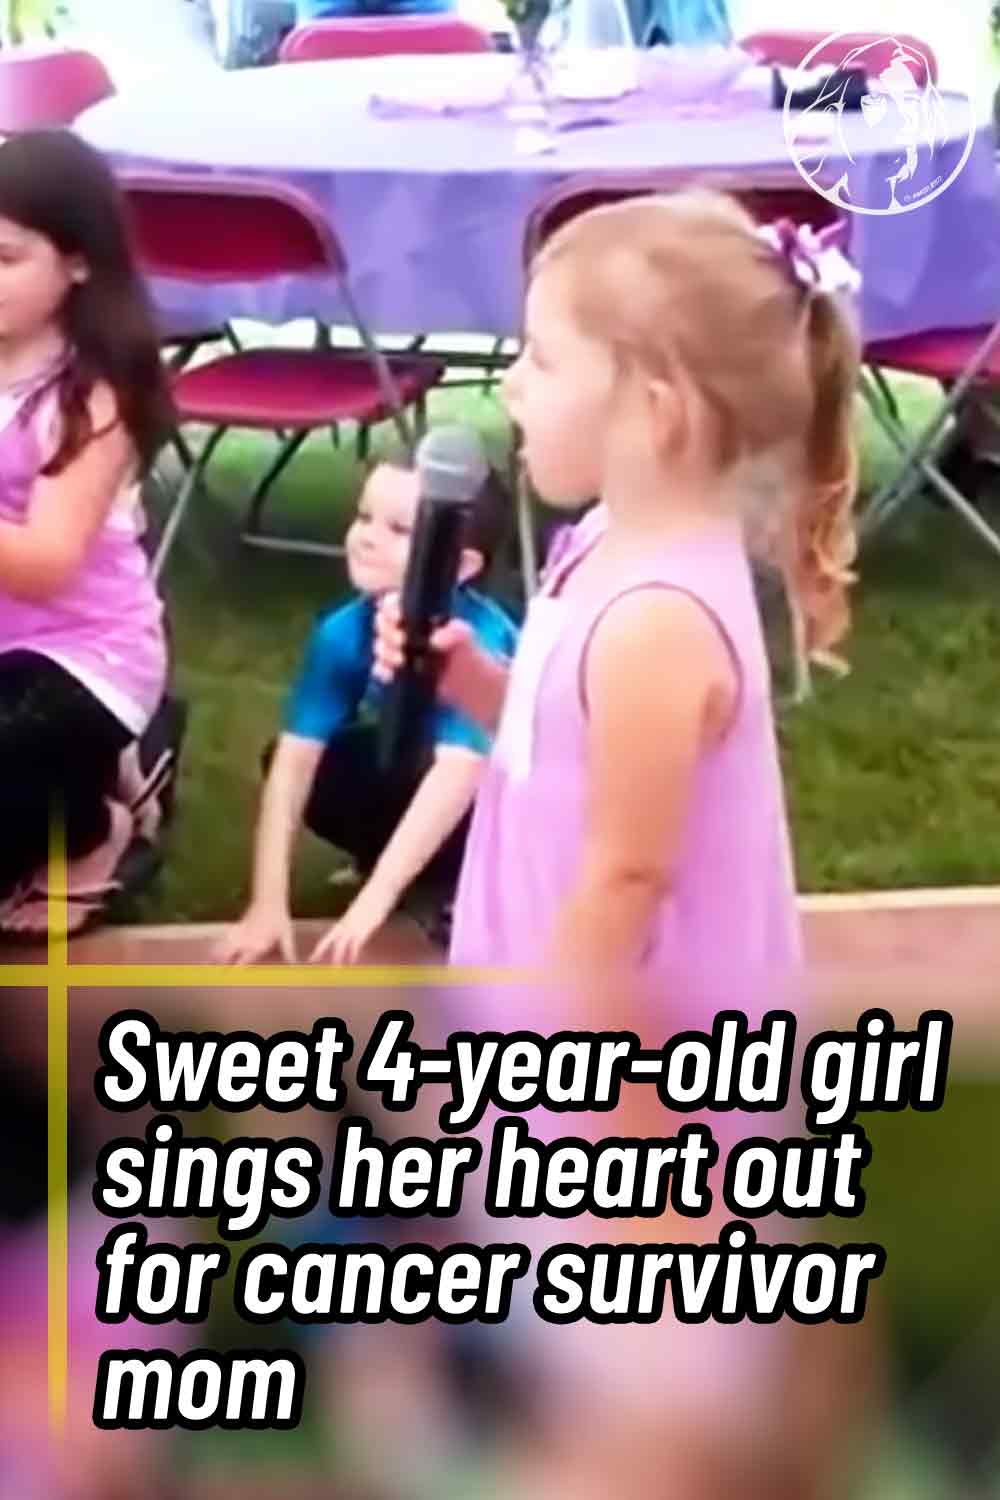 Sweet 4-year-old girl sings her heart out for cancer survivor mom